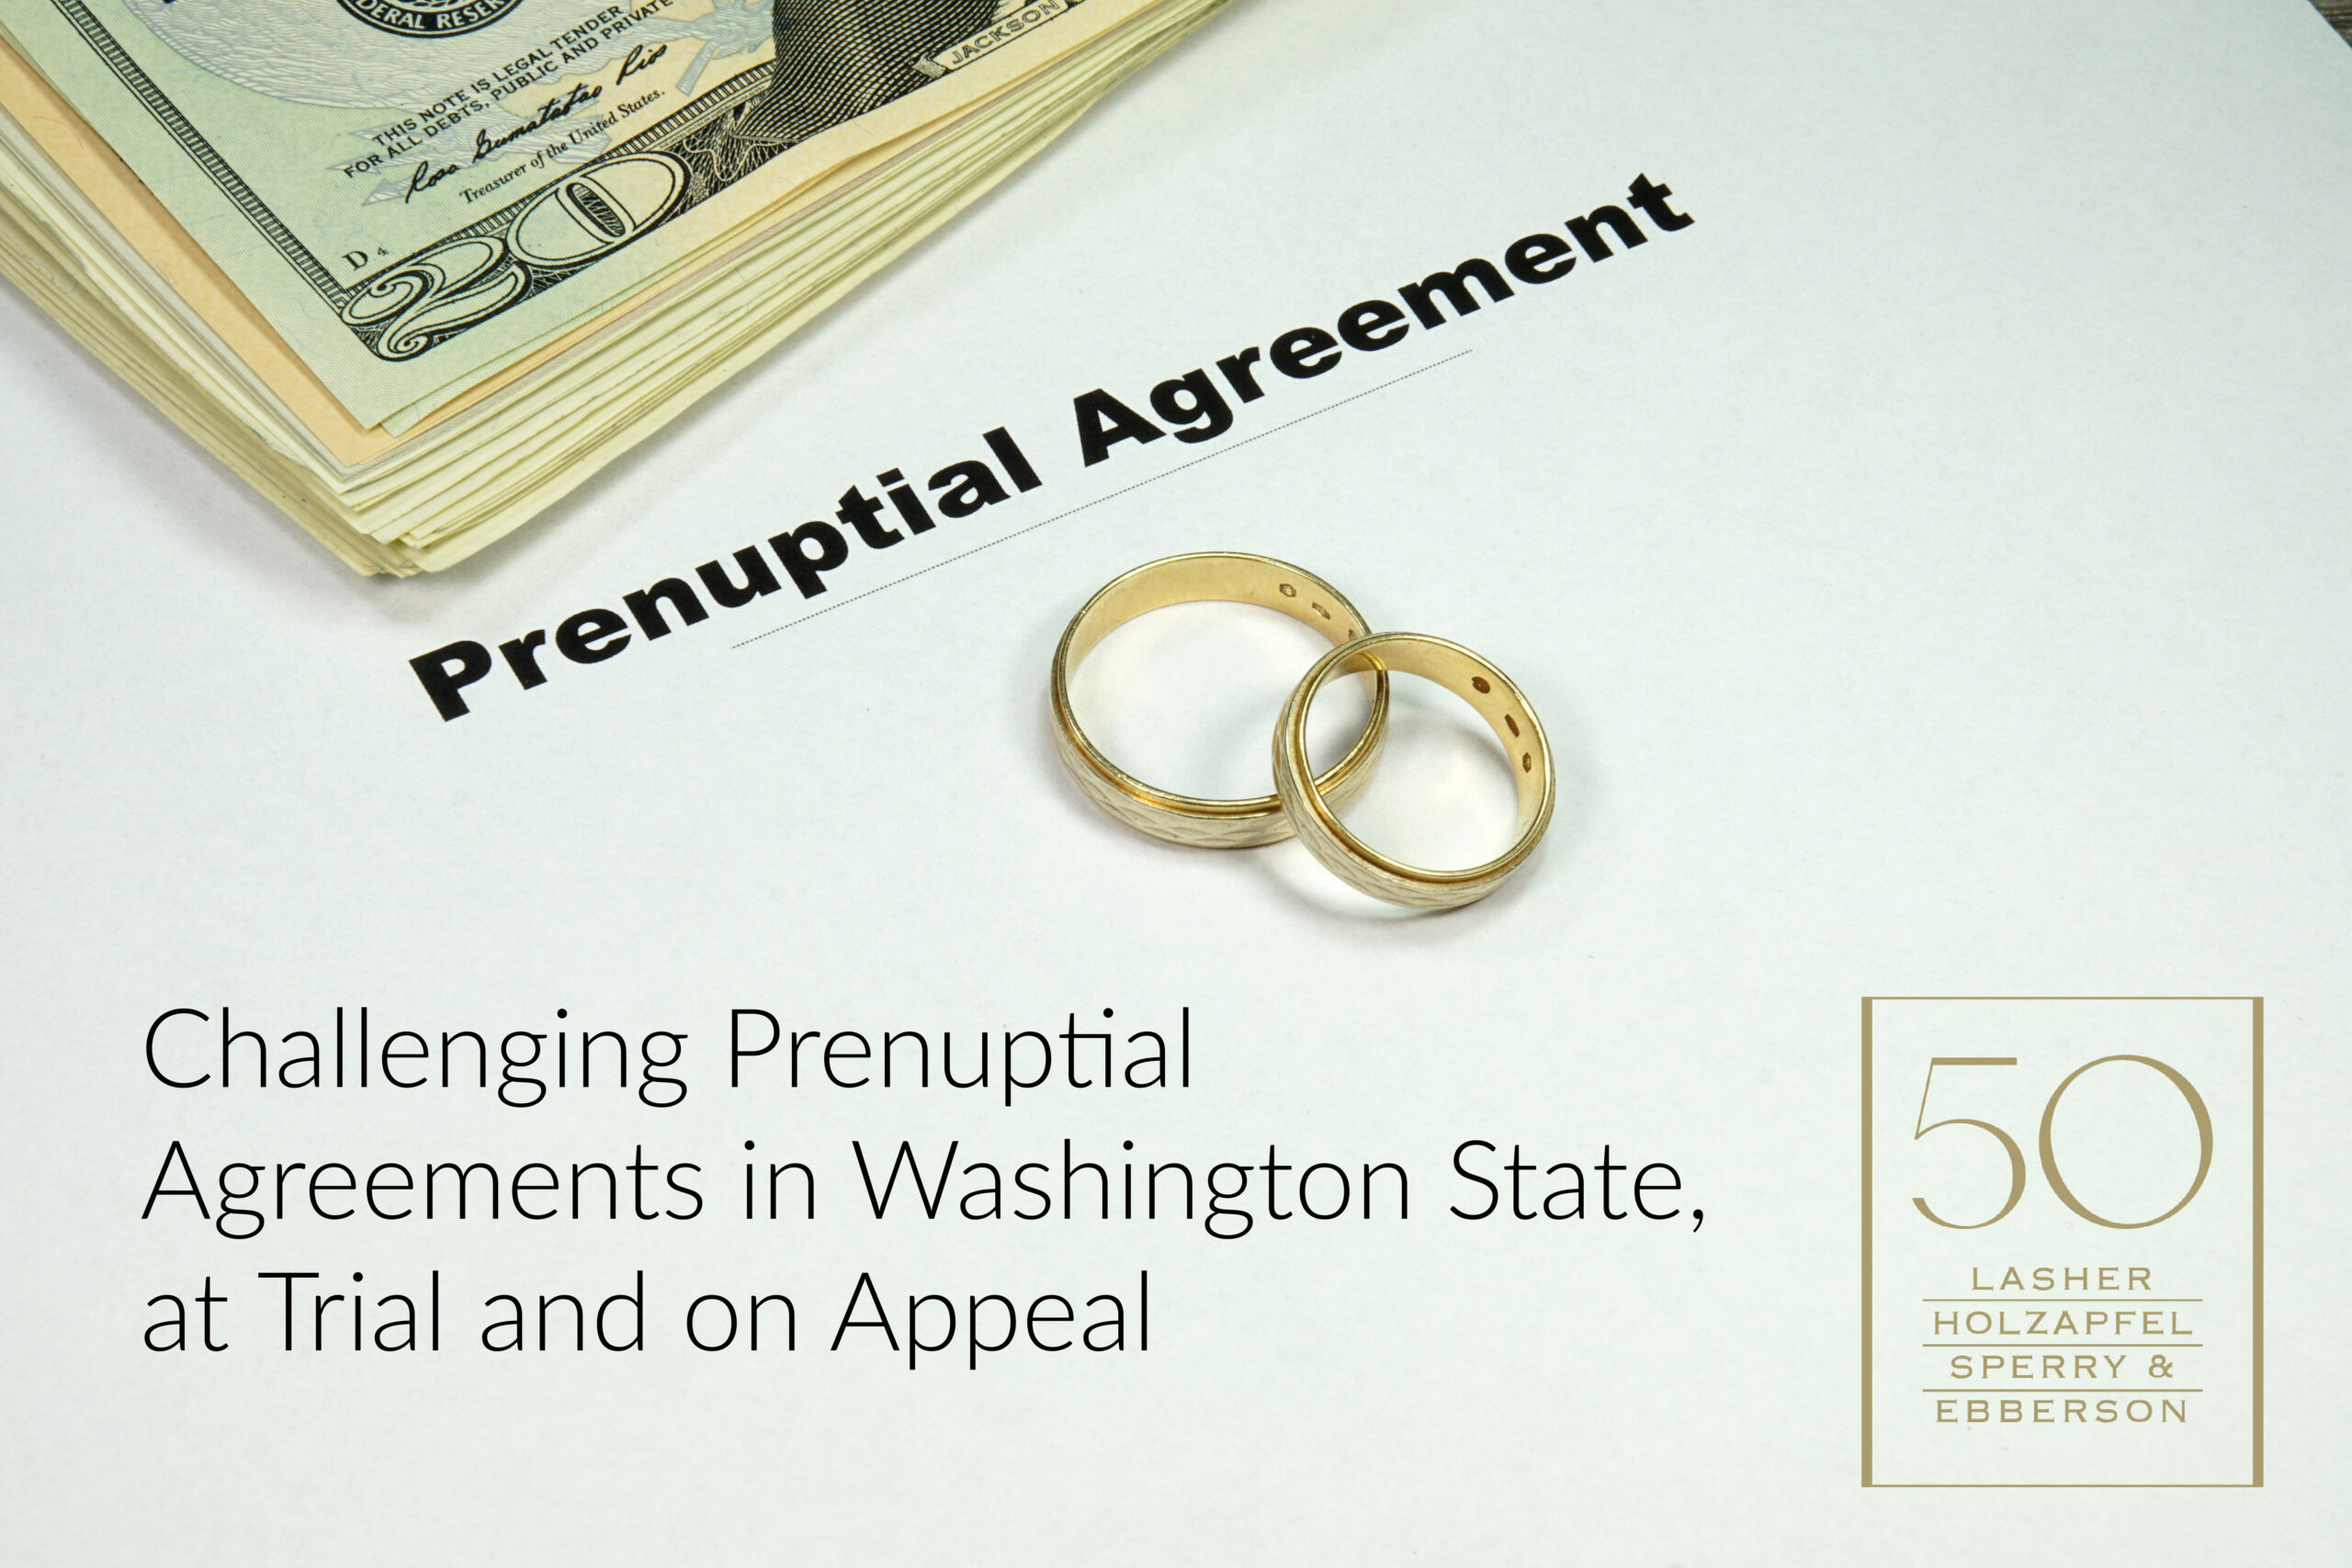 Wedding rings and prenuptial agreement